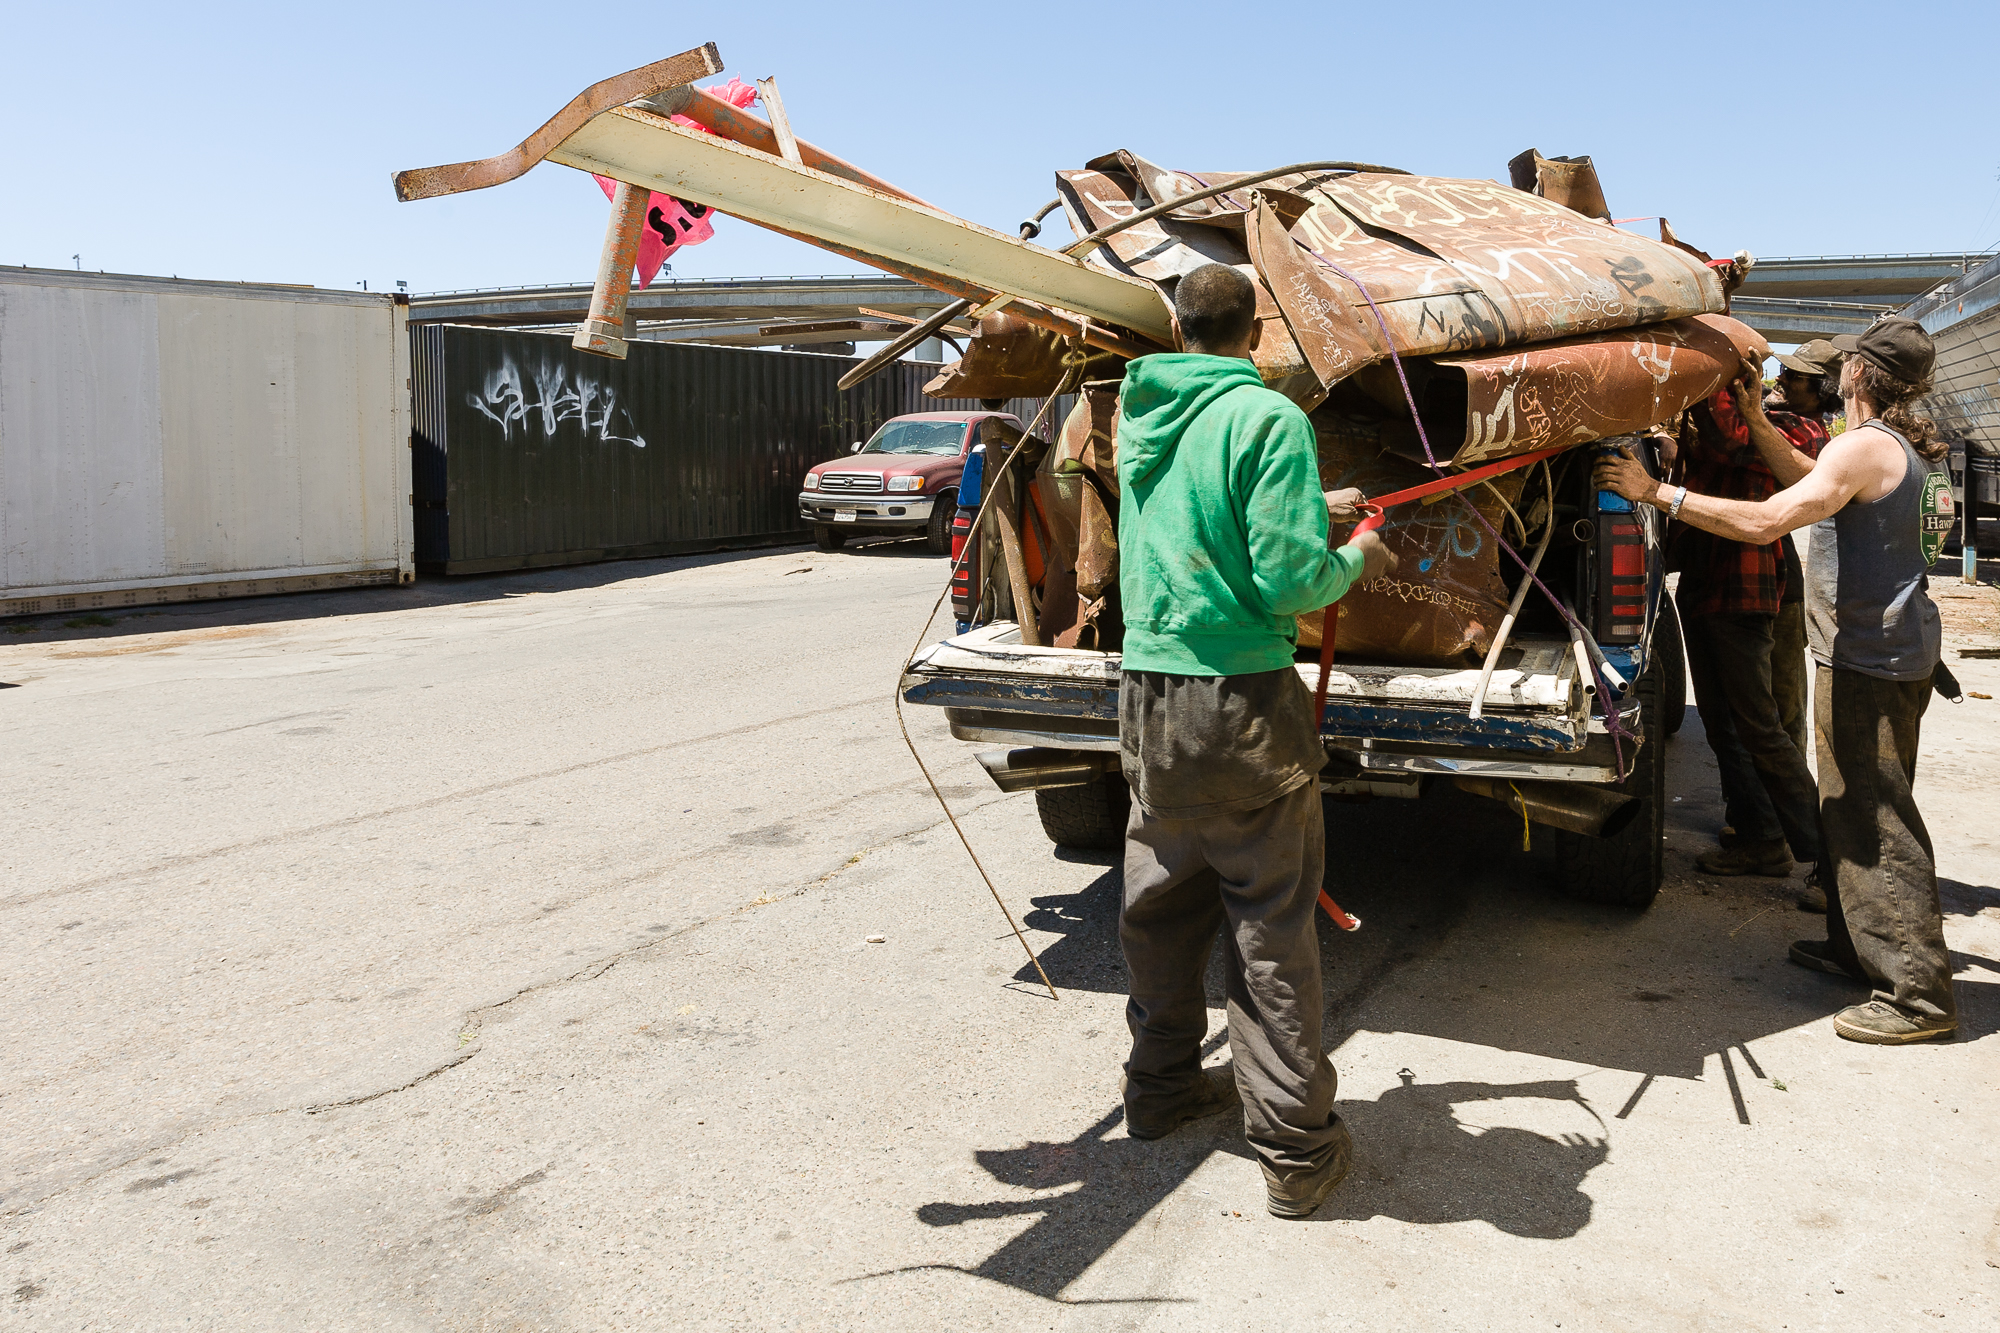  Loading the truck with the collected scrap is a group effort. It must be done quickly and efficiently. The more metal that gets hauled away the more money each person earns at the end of the day. 